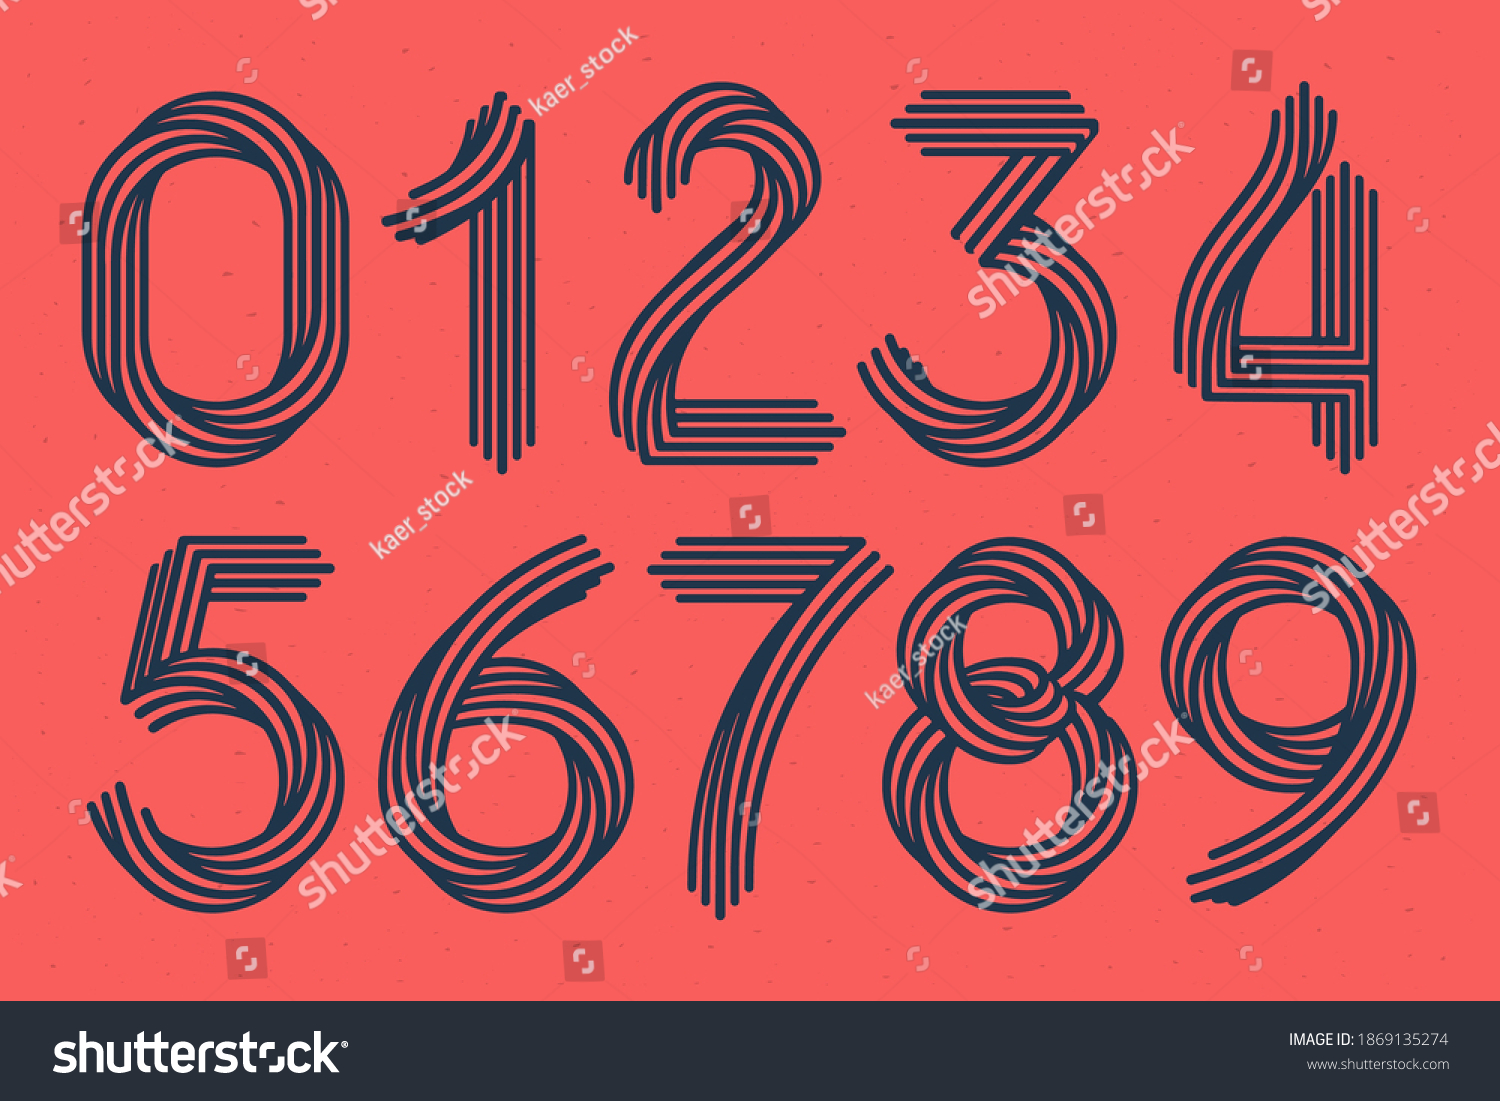 SVG of Numbers set made of five parallel lines with noise texture. Impossible shape logos. Vector vintage font for boutique labels, chic headlines, jewelry posters, wedding cards etc. svg